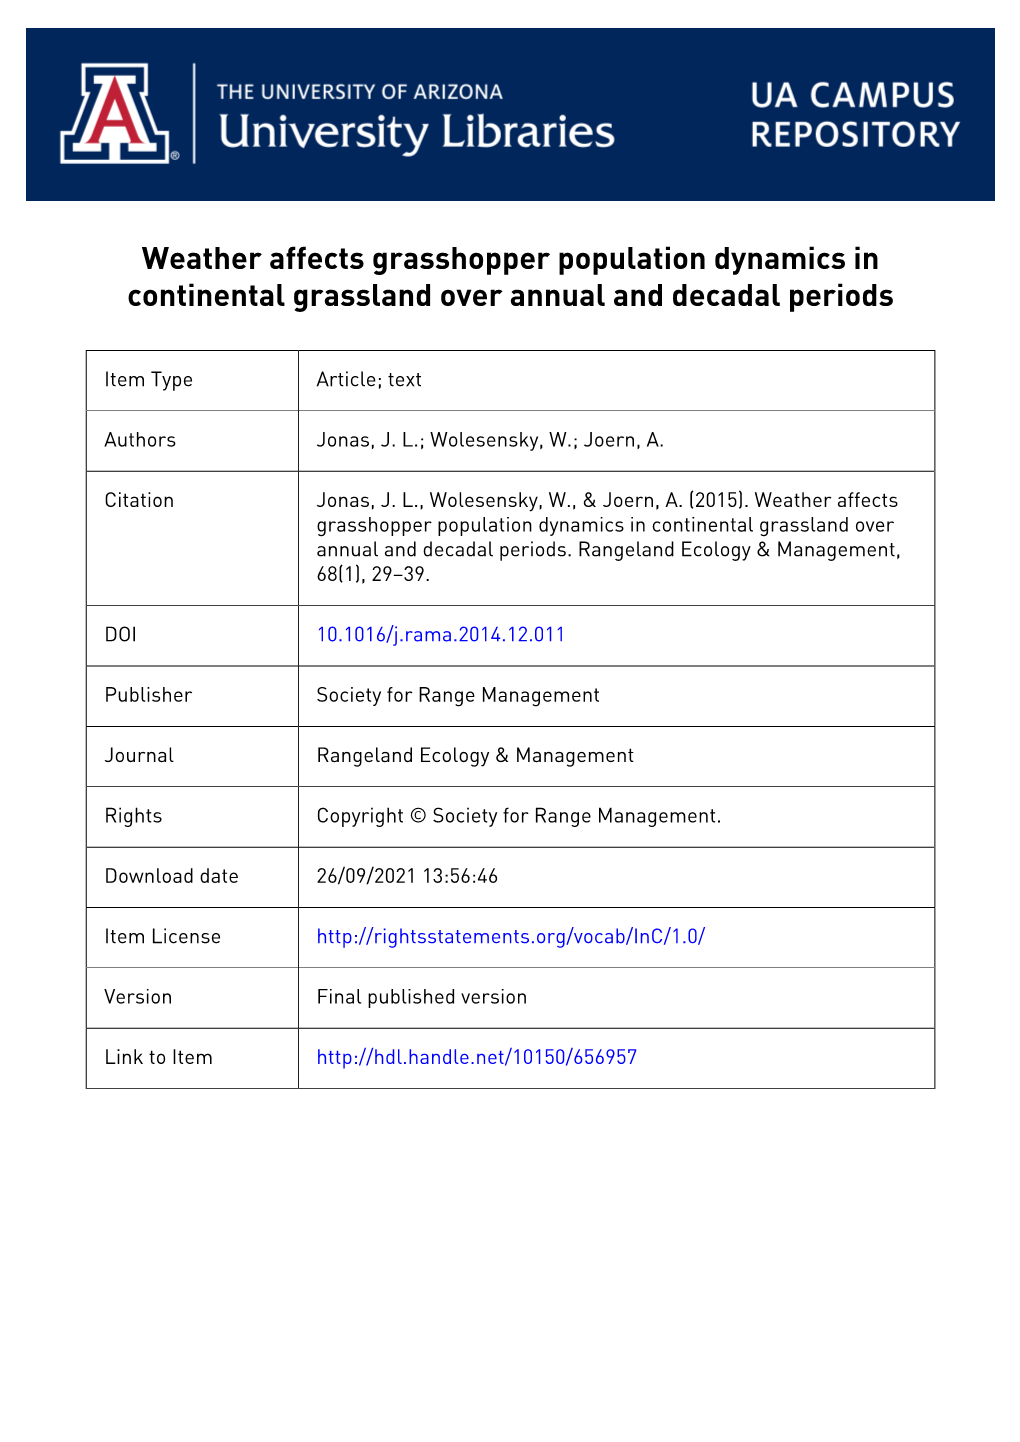 Weather Affects Grasshopper Population Dynamics in Continental Grassland Over Annual and Decadal Periods